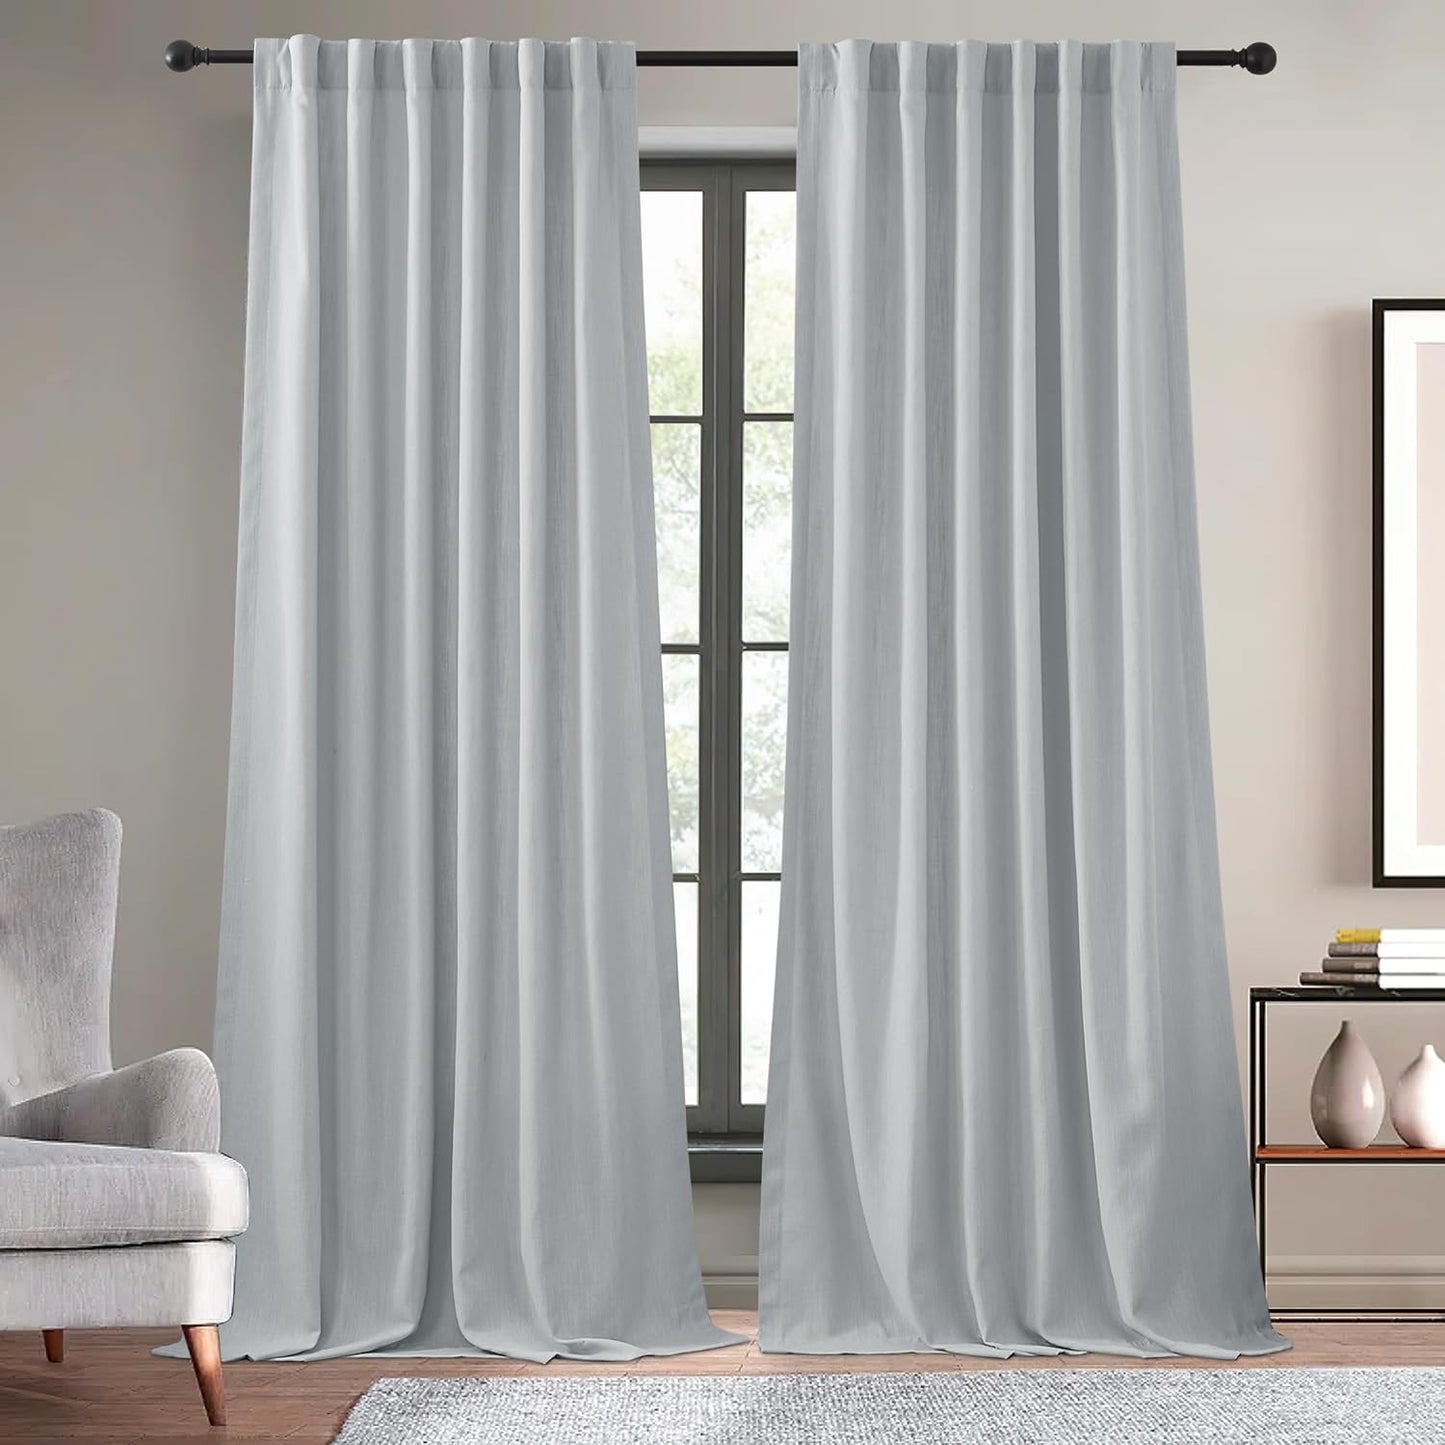 KGORGE Thick Faux Linen Weave Textured Curtains for Bedroom Light Filtering Semi Sheer Curtains Farmhouse Decor Pinch Pleated Window Drapes for Living Room, Linen, W 52" X L 96", 2 Pcs  KGORGE Sliver Grey W 52 X L 120 | Pair 